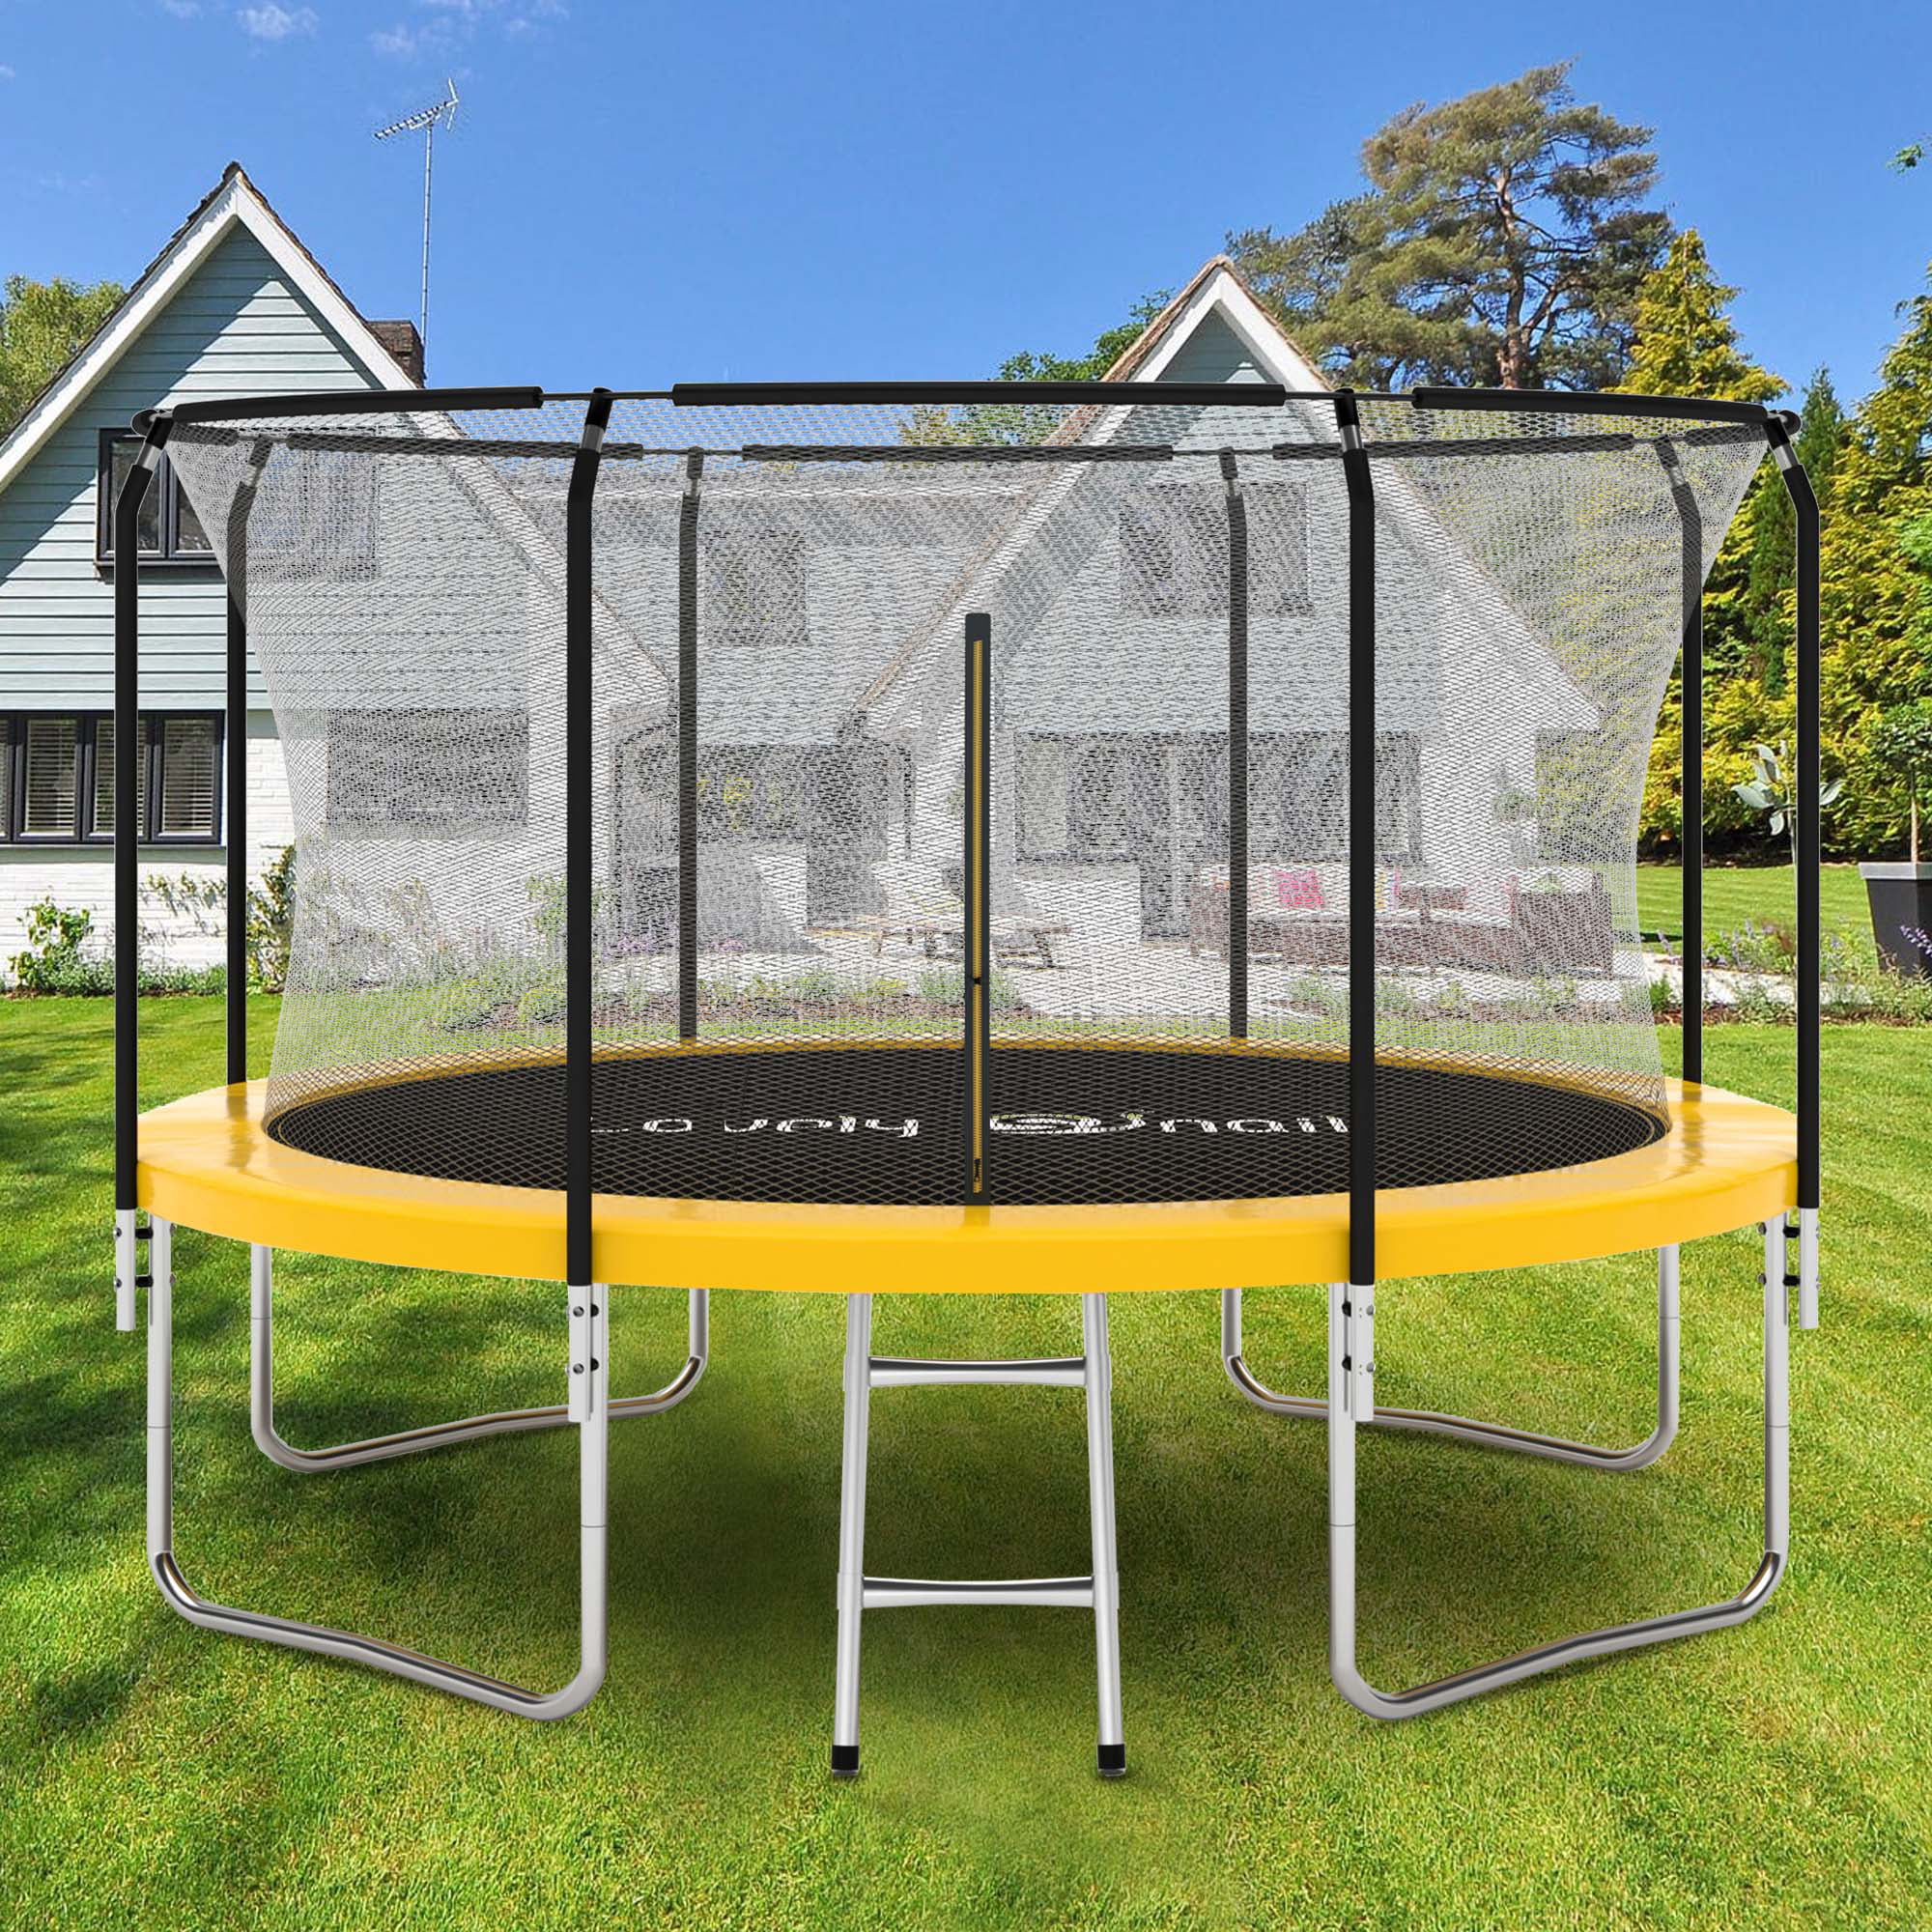 New 12FT Trampoline Combo Bounce Jump Safety Enclosure Net w/Spring Pad Ladder 